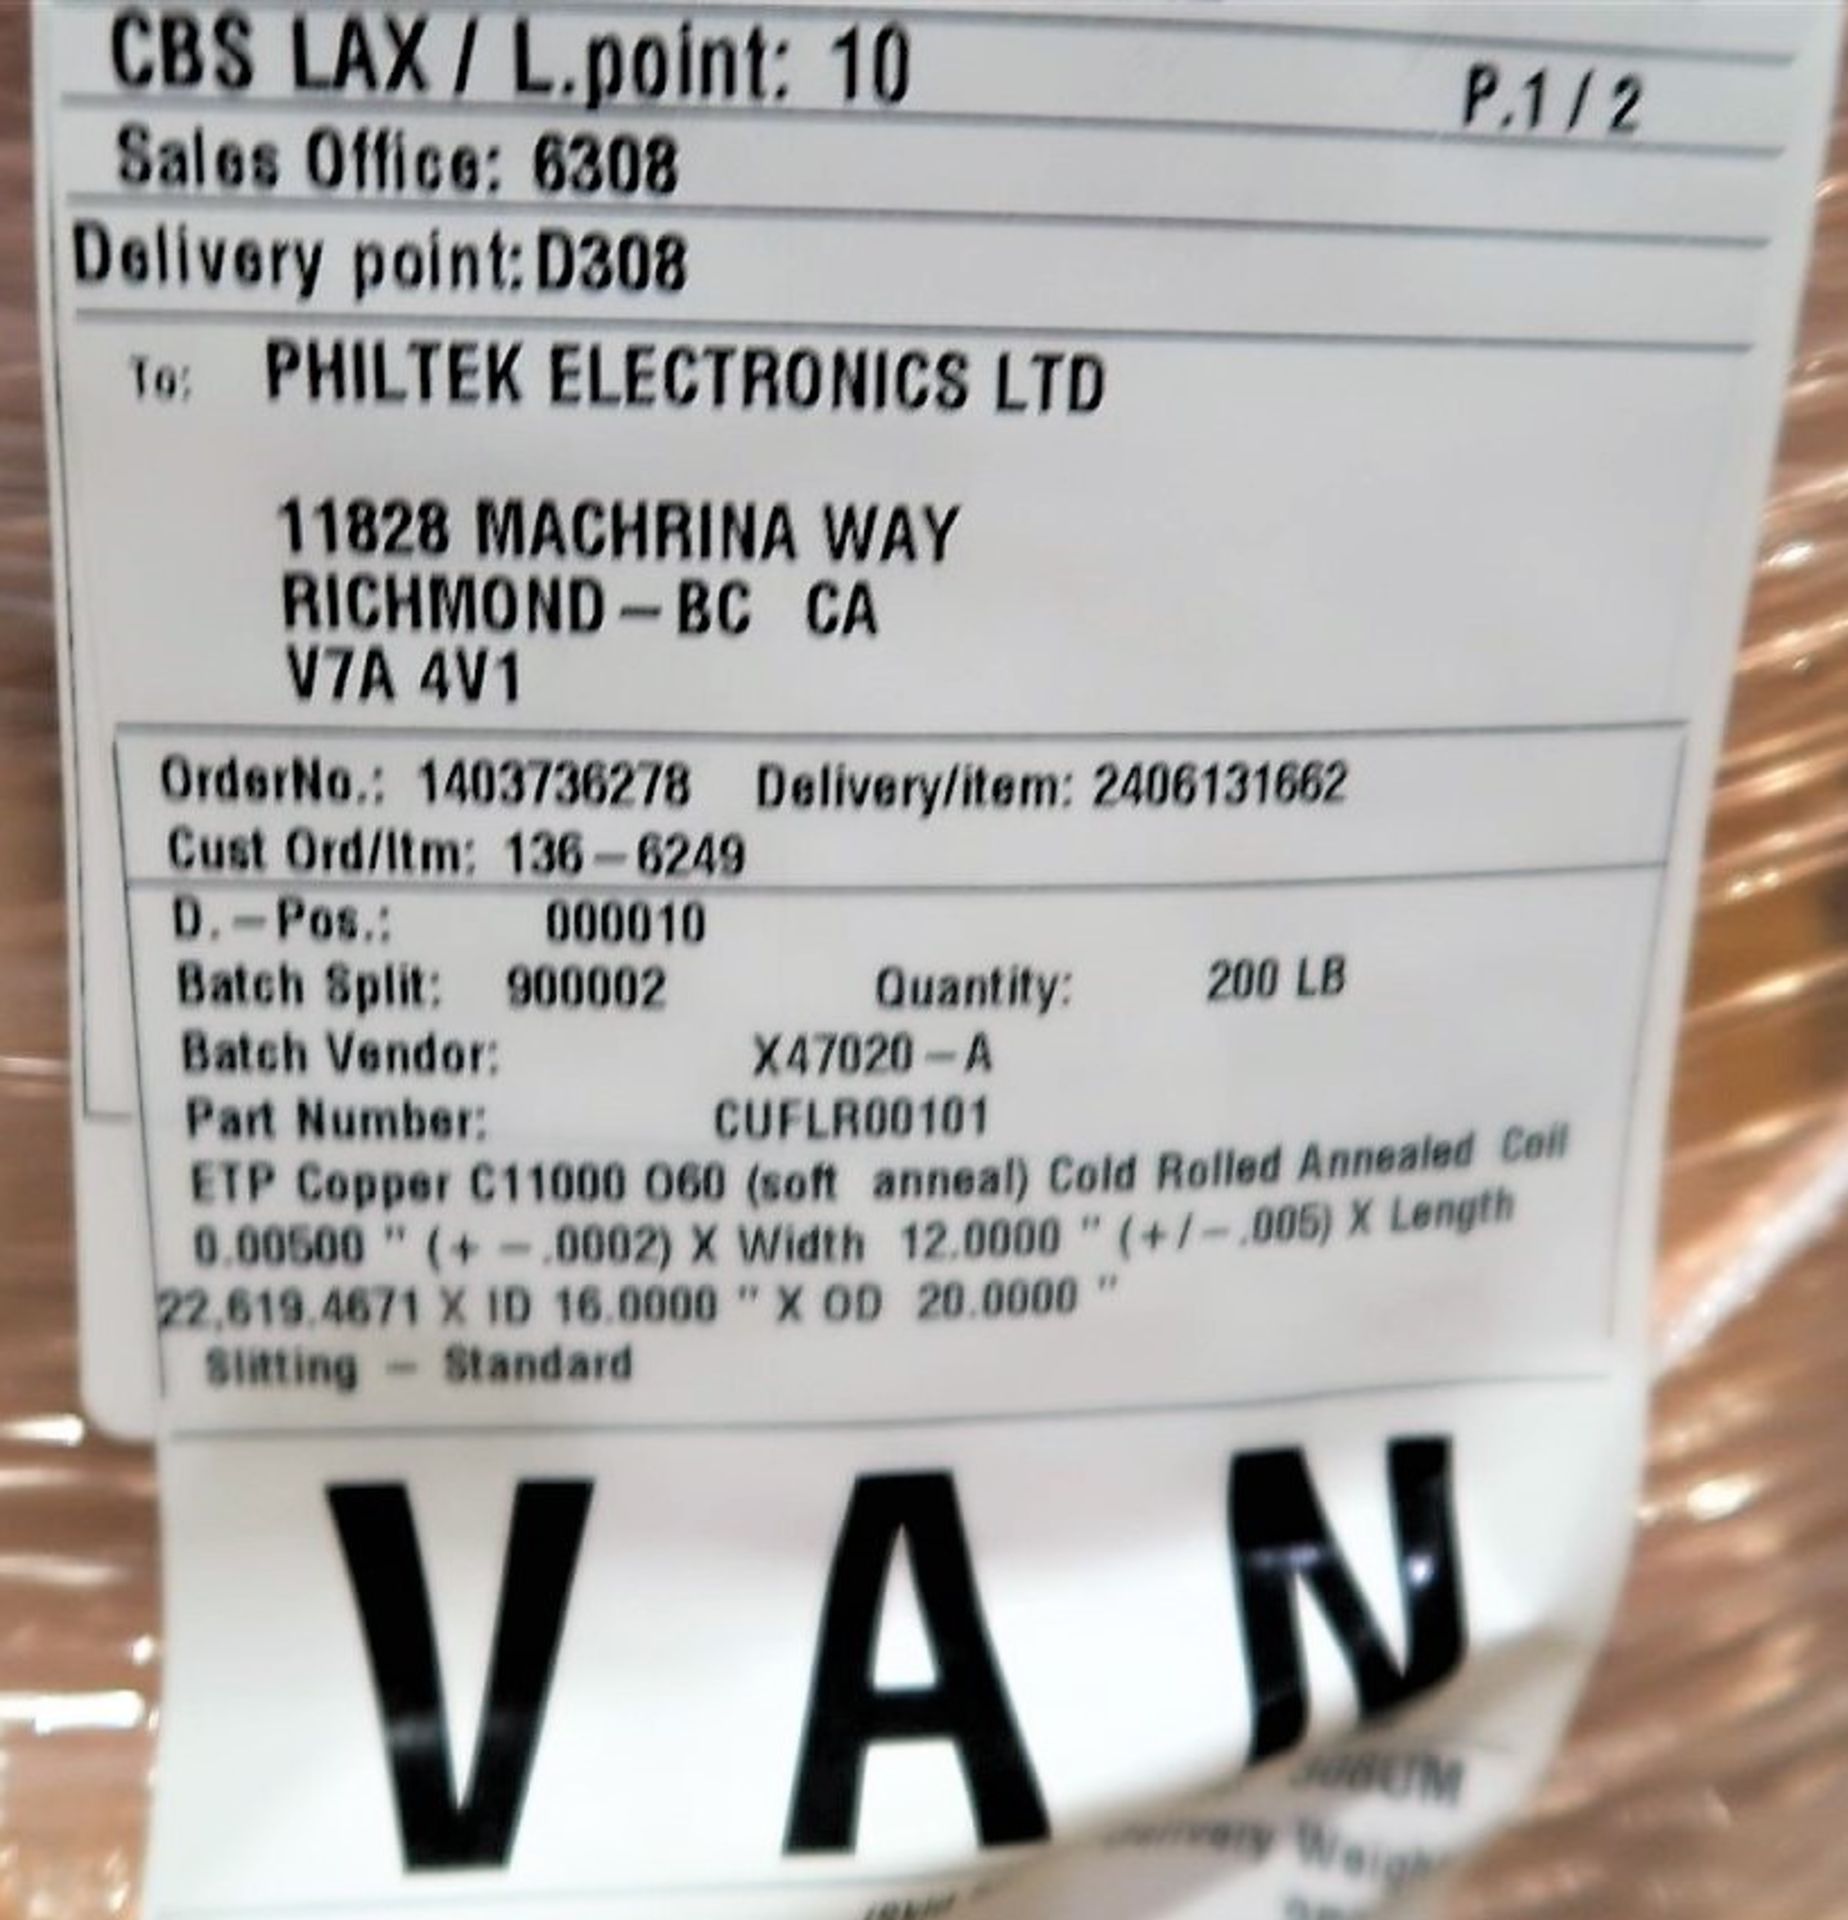 PALLET OF 4 COILS OF 12" W COPPER SHEETING - 200 LBS., 1 ROLL 12 " COPPER APPROX. 50 LBS., ROLL ON - Image 2 of 2